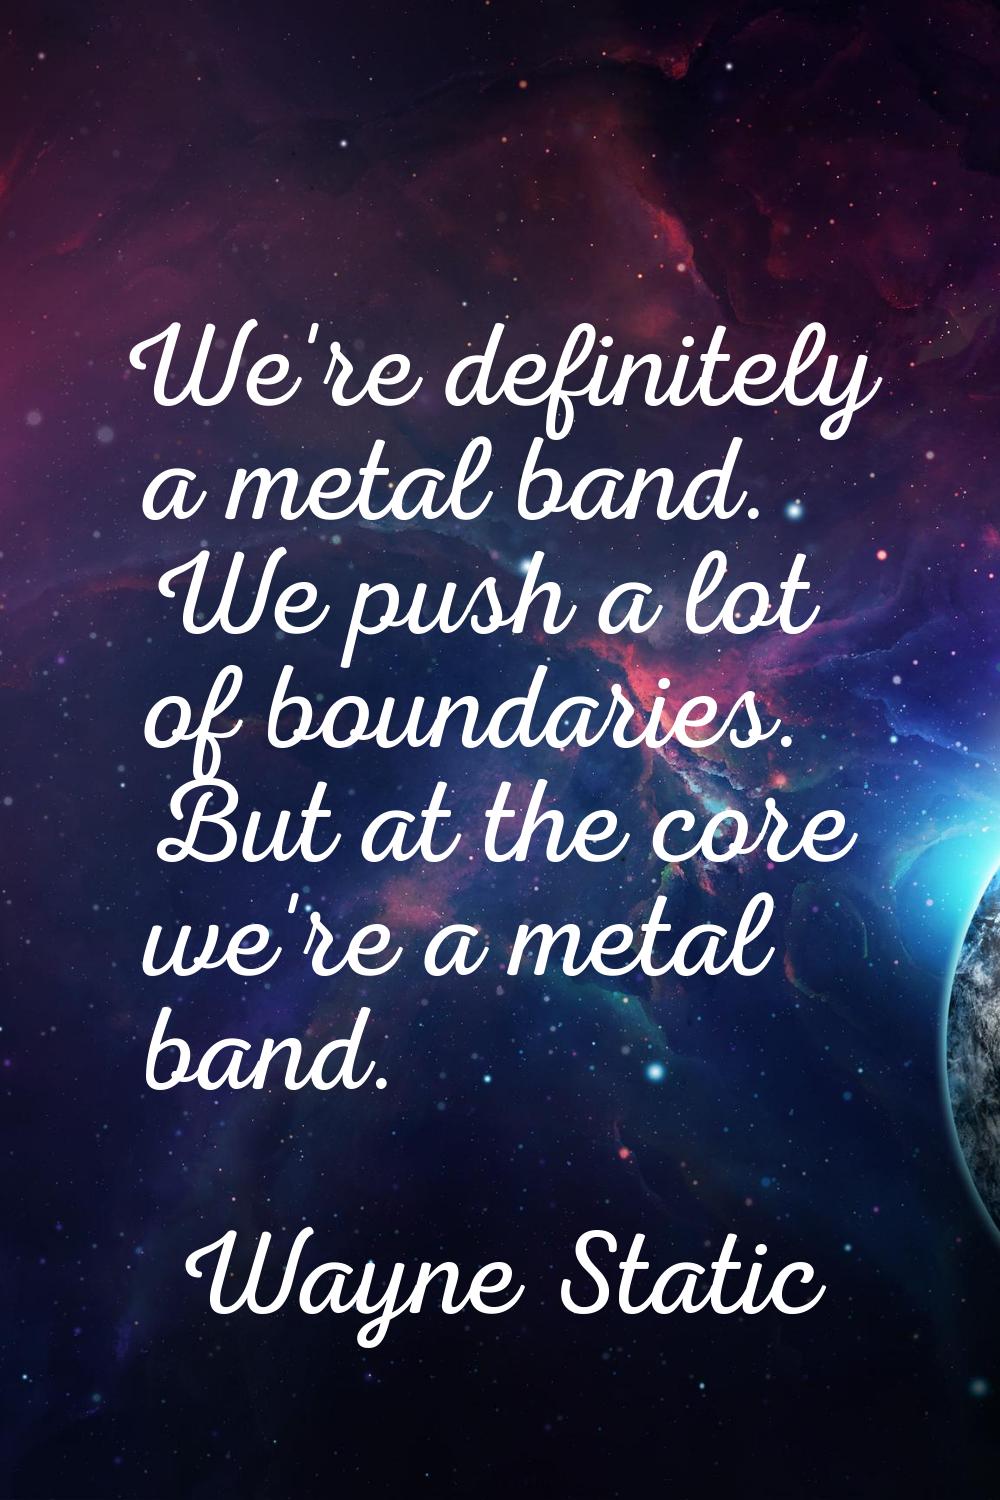 We're definitely a metal band. We push a lot of boundaries. But at the core we're a metal band.